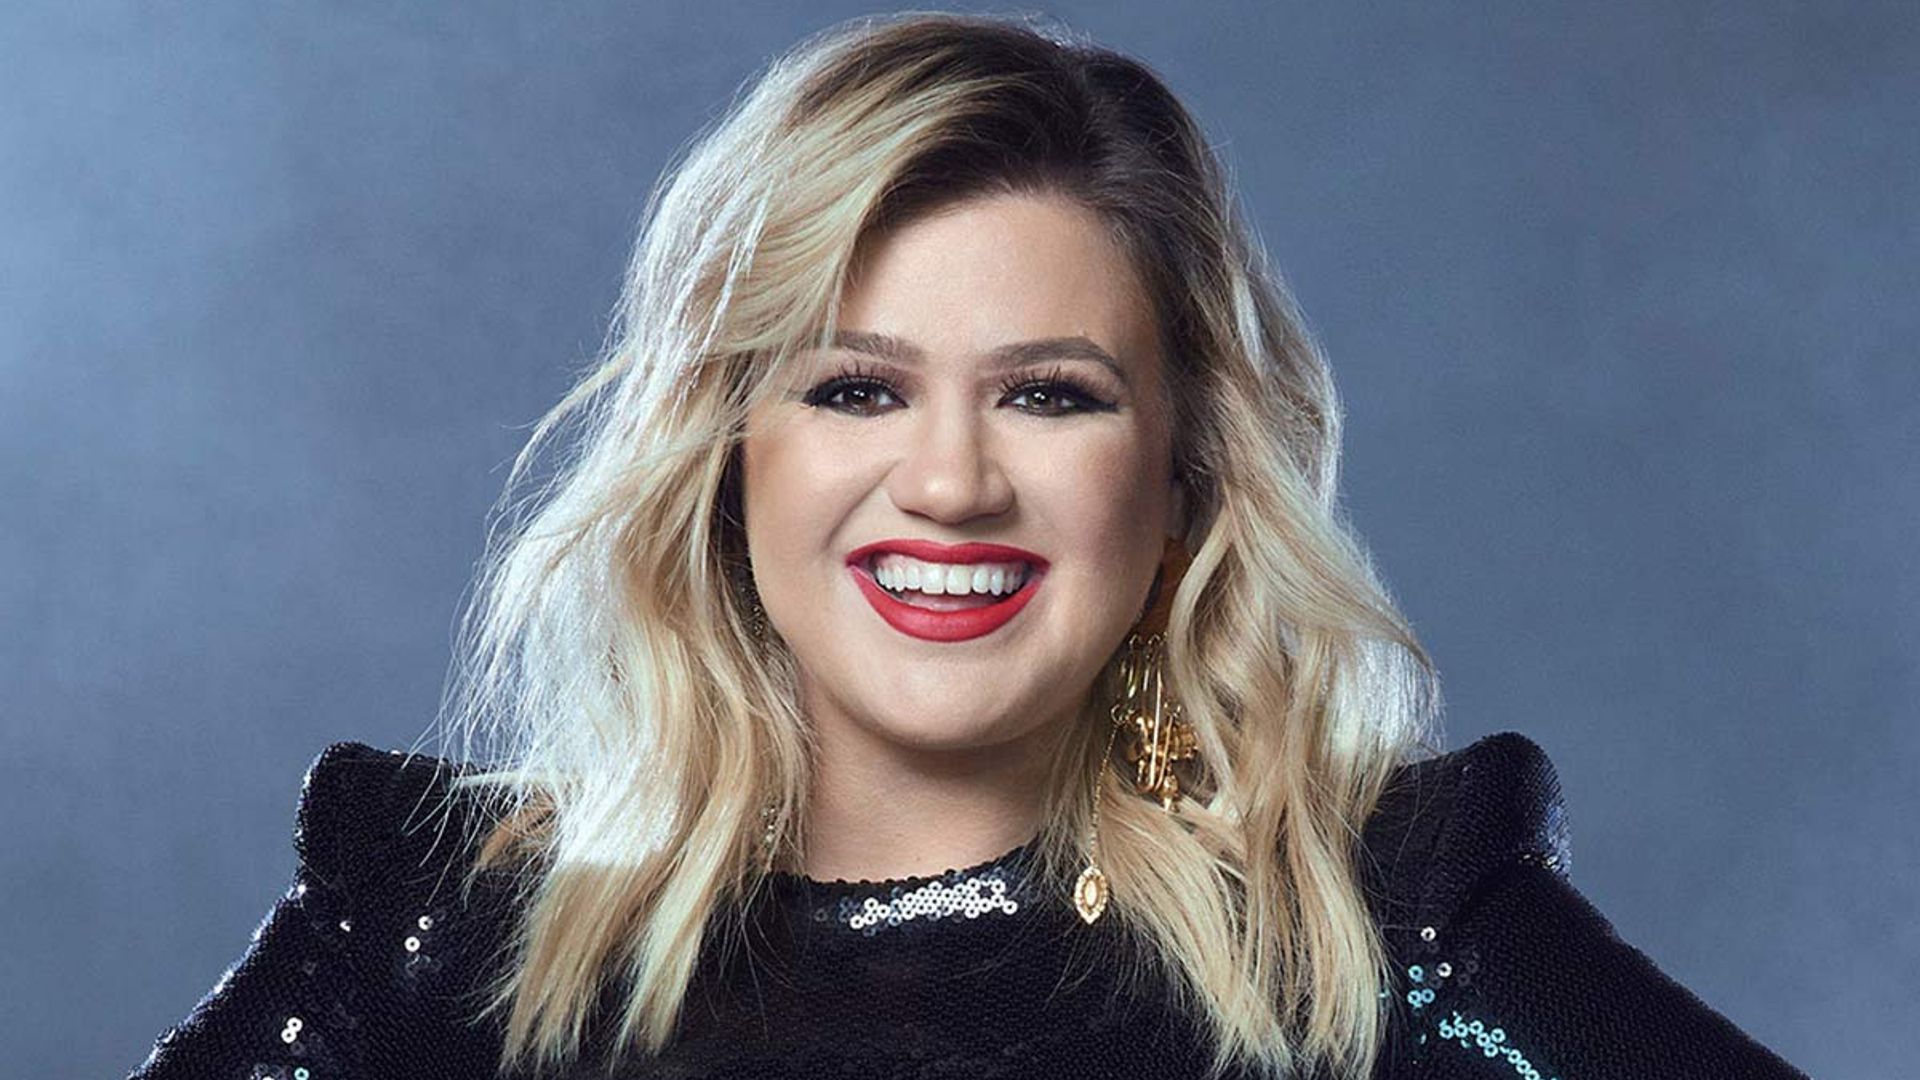 Kelly Clarkson made a victorious statement in a chic look at Daytime Emmy Awards